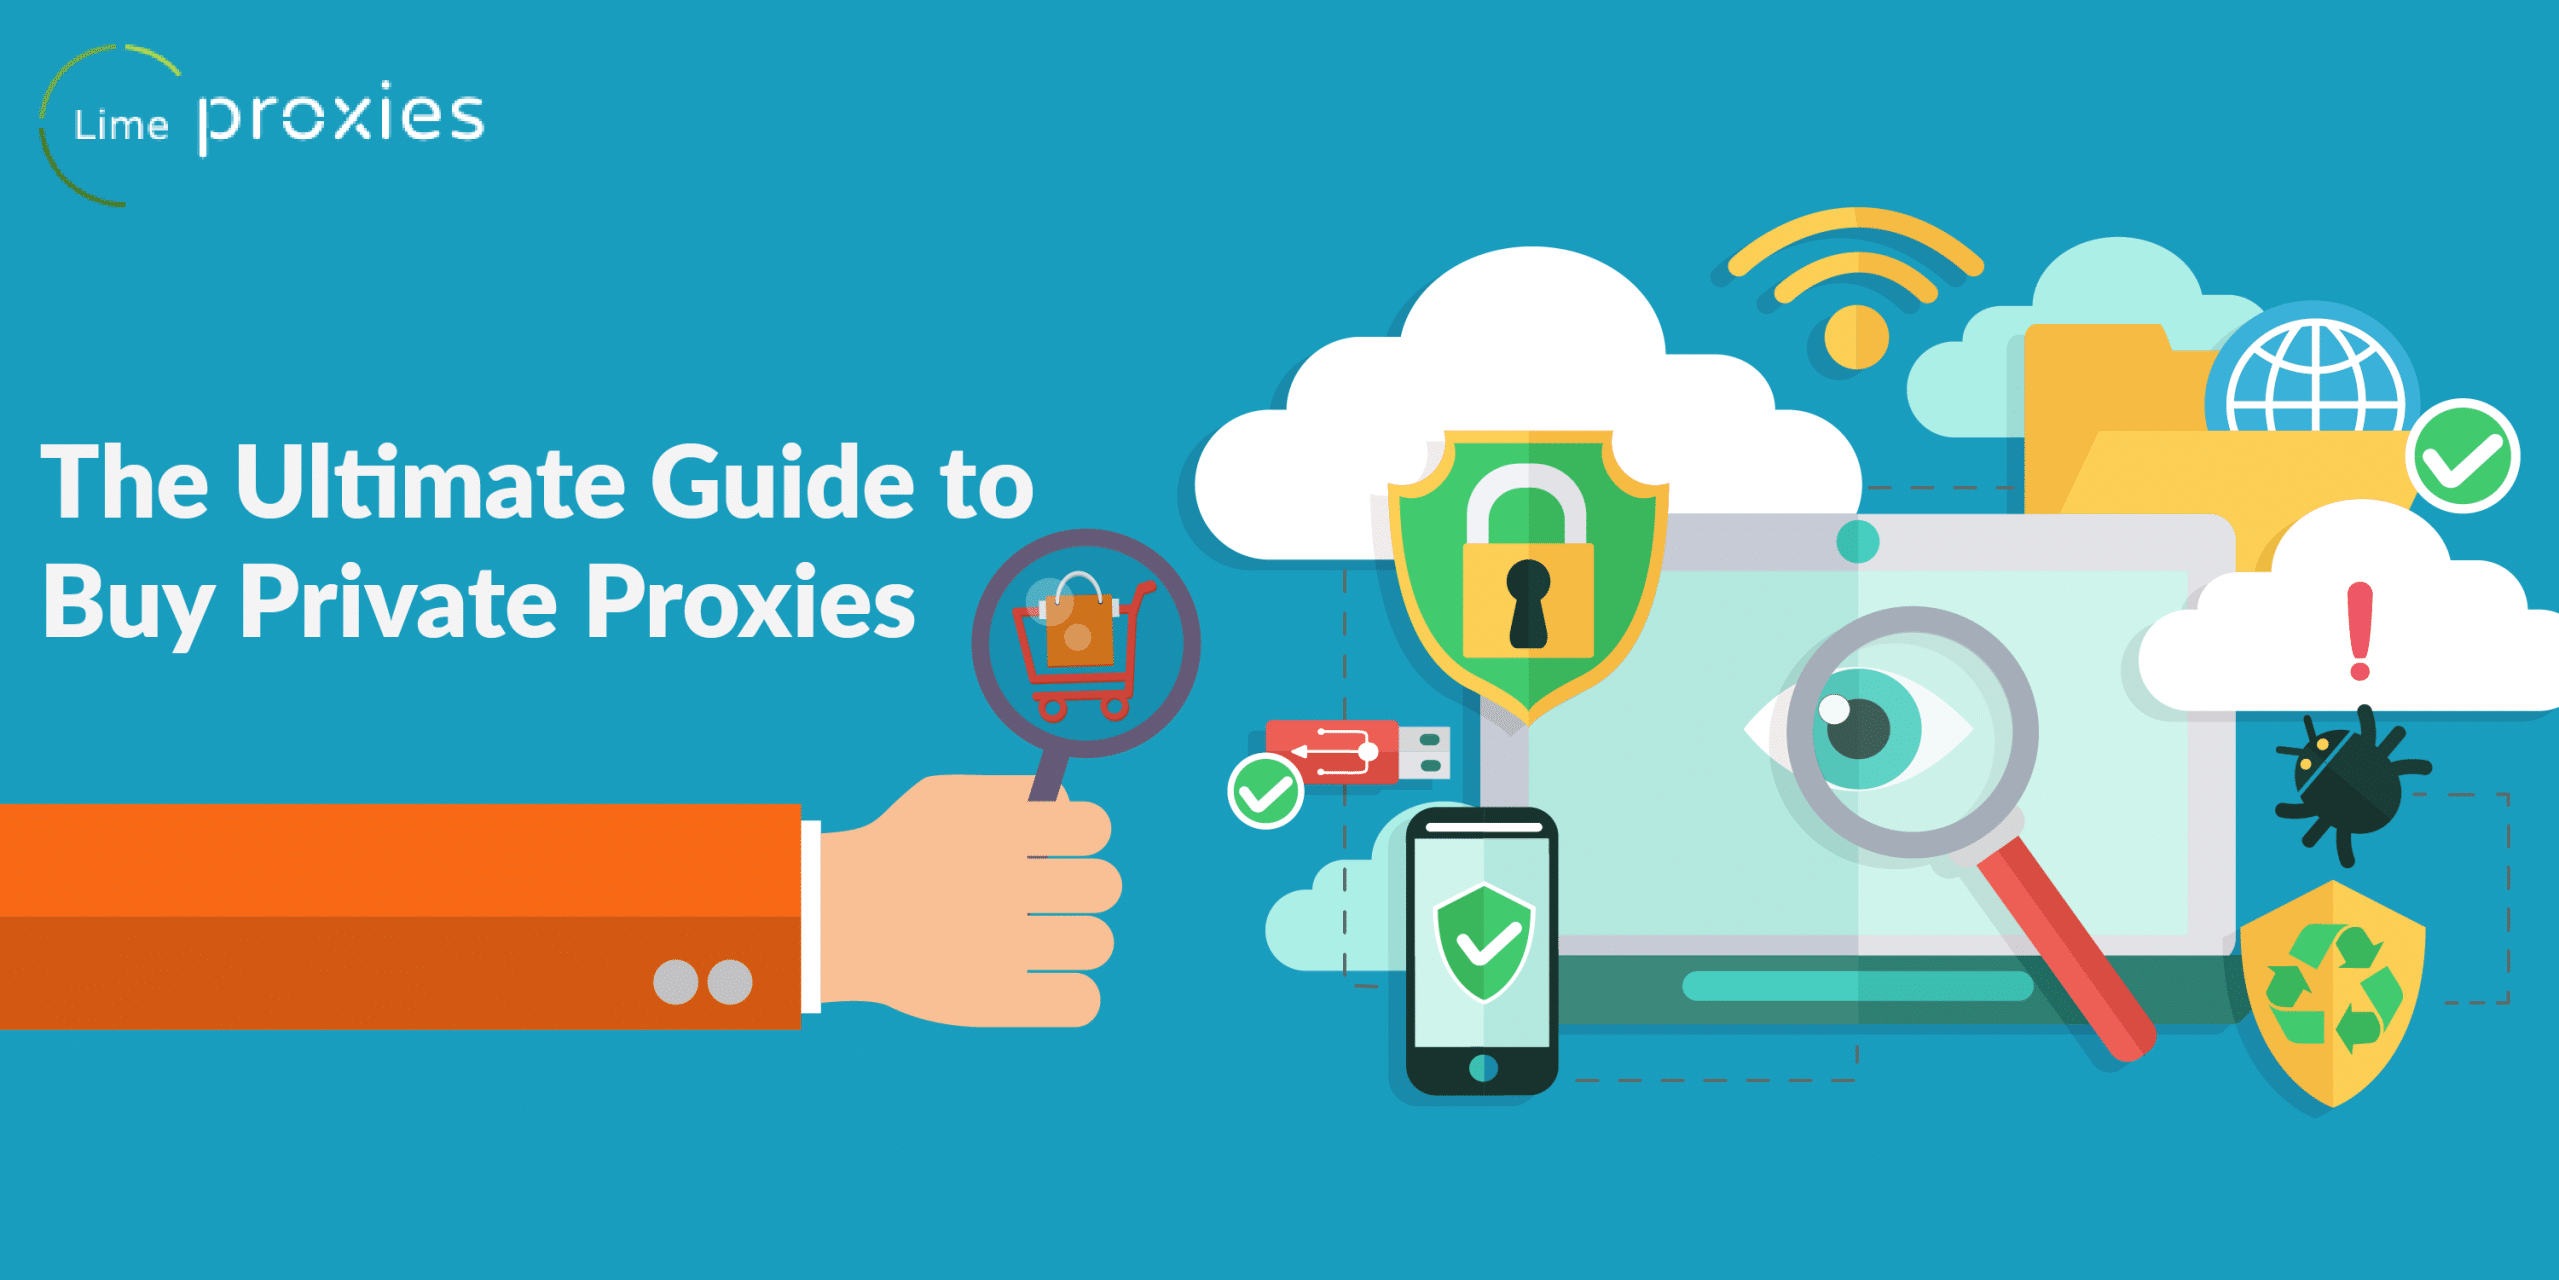 The Ultimate Guide to Buying UK Proxies: Everything You Need to Know